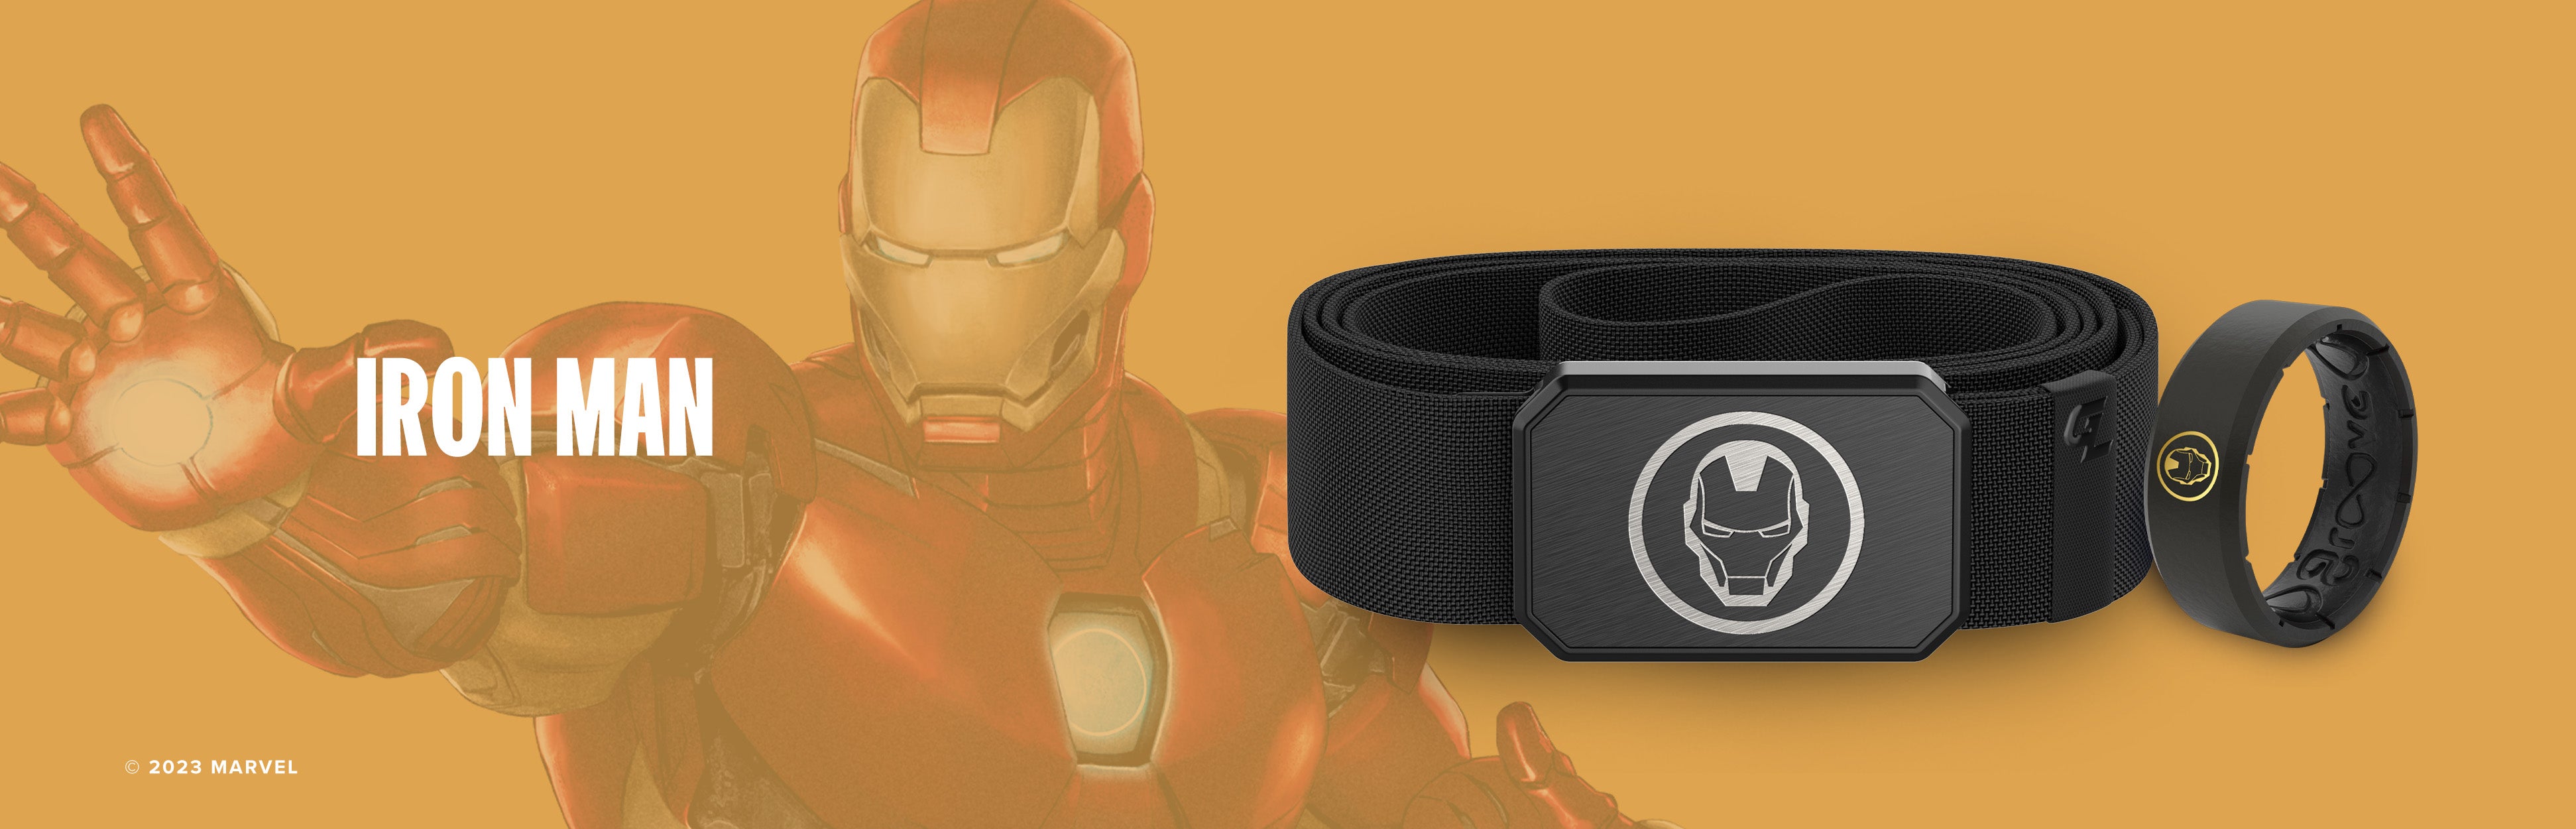 Iron man belts and rings by Groove Life